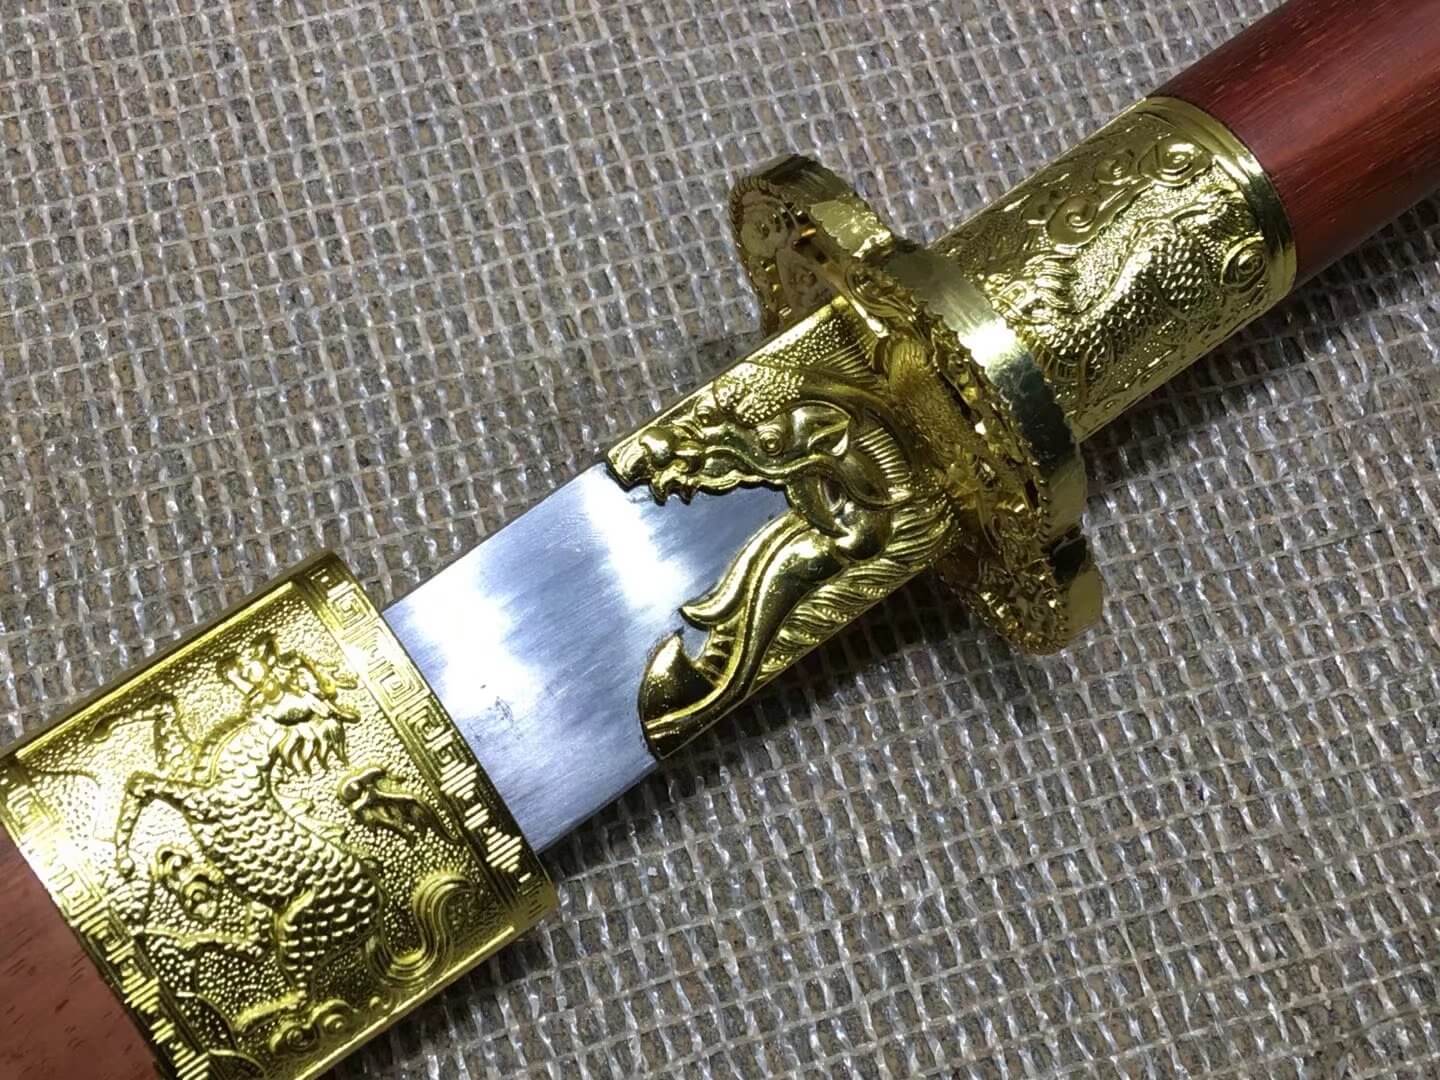 Kangxi dagger,High carbon steel,Red scabbard,Alloy fitted,Length 27" - Chinese sword shop